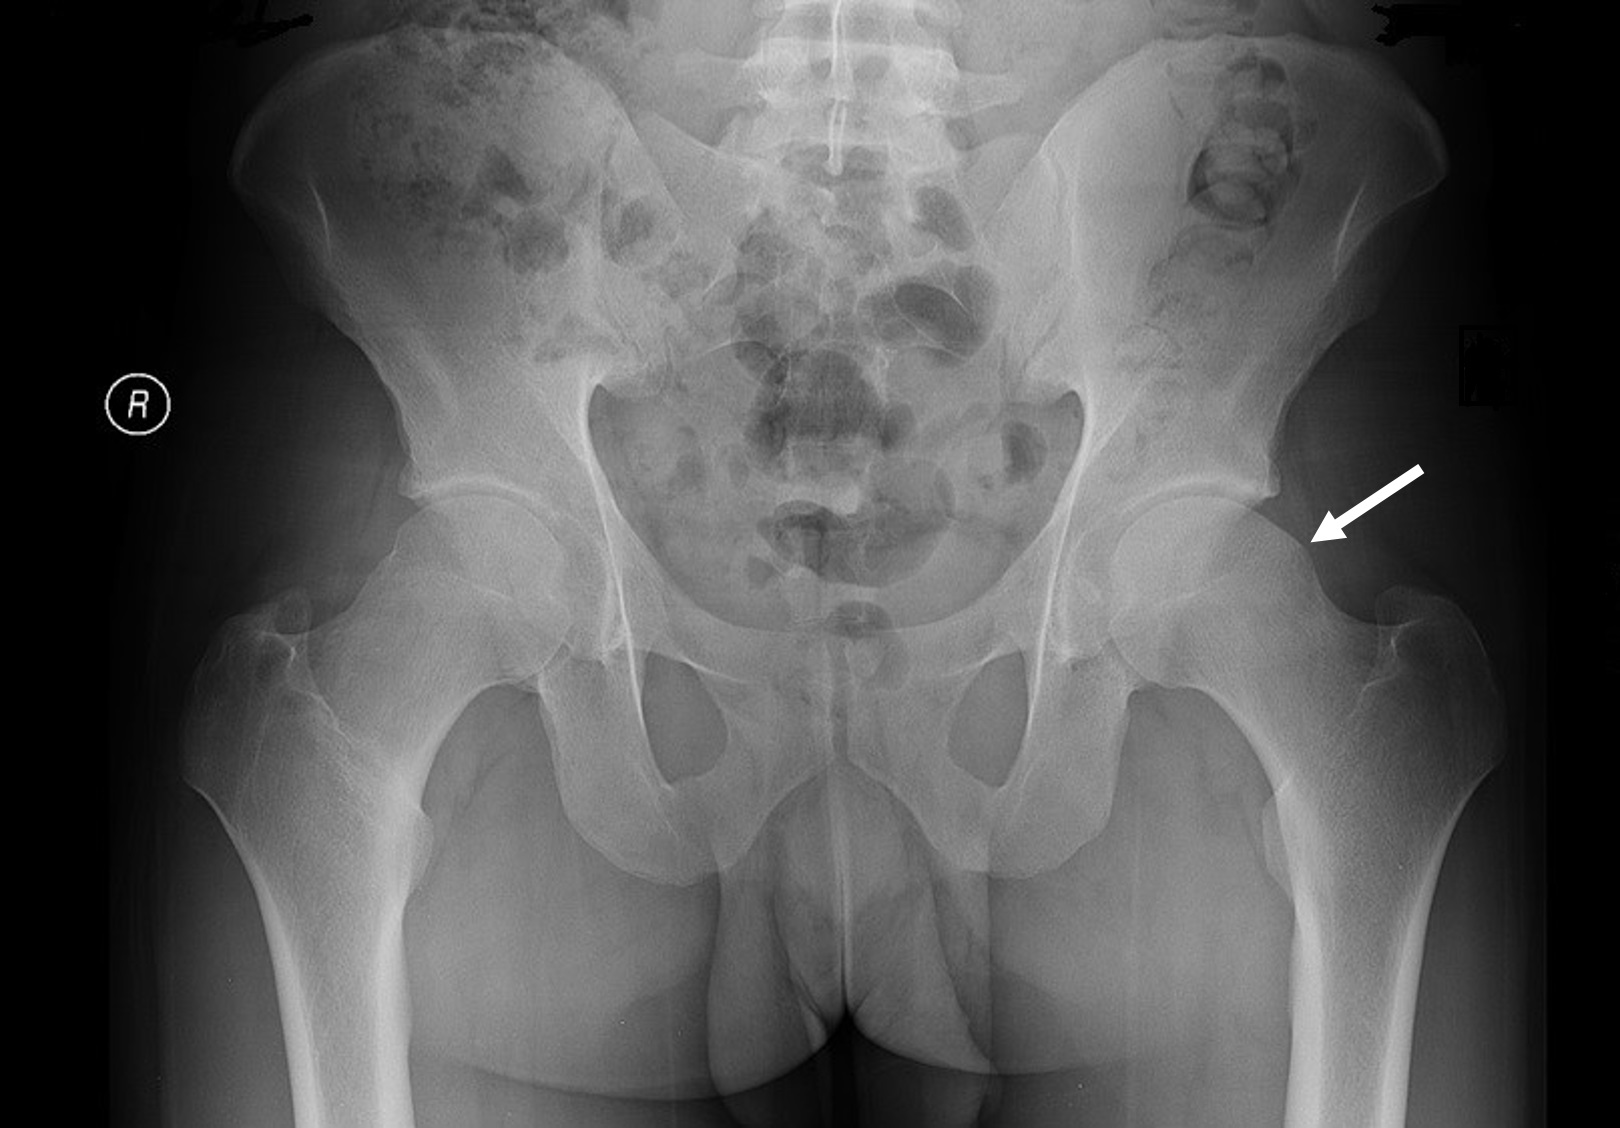 AP pelvis x-ray demonstrating a left hip cam lesion (indicated by white arrow) causing femoroacetabular impingement in this patient